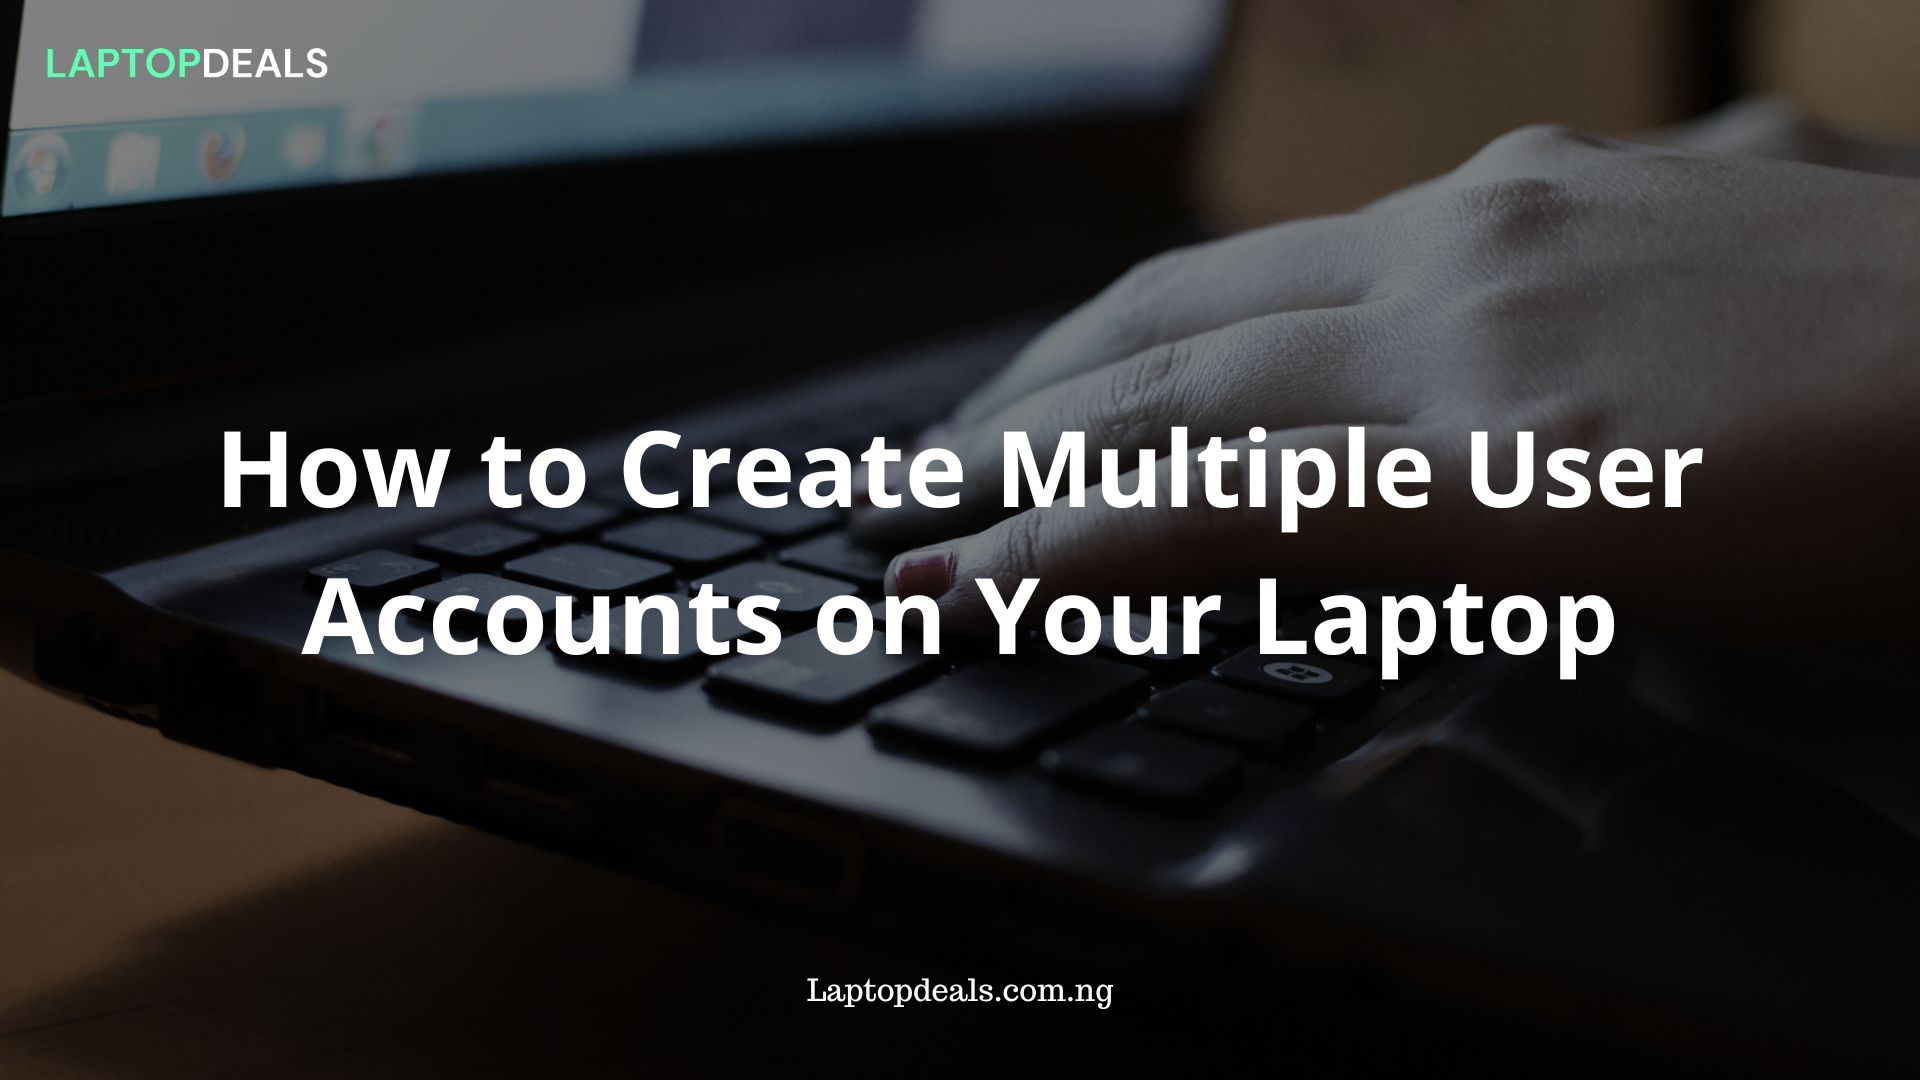 How to Create Multiple User Accounts on Your Laptop